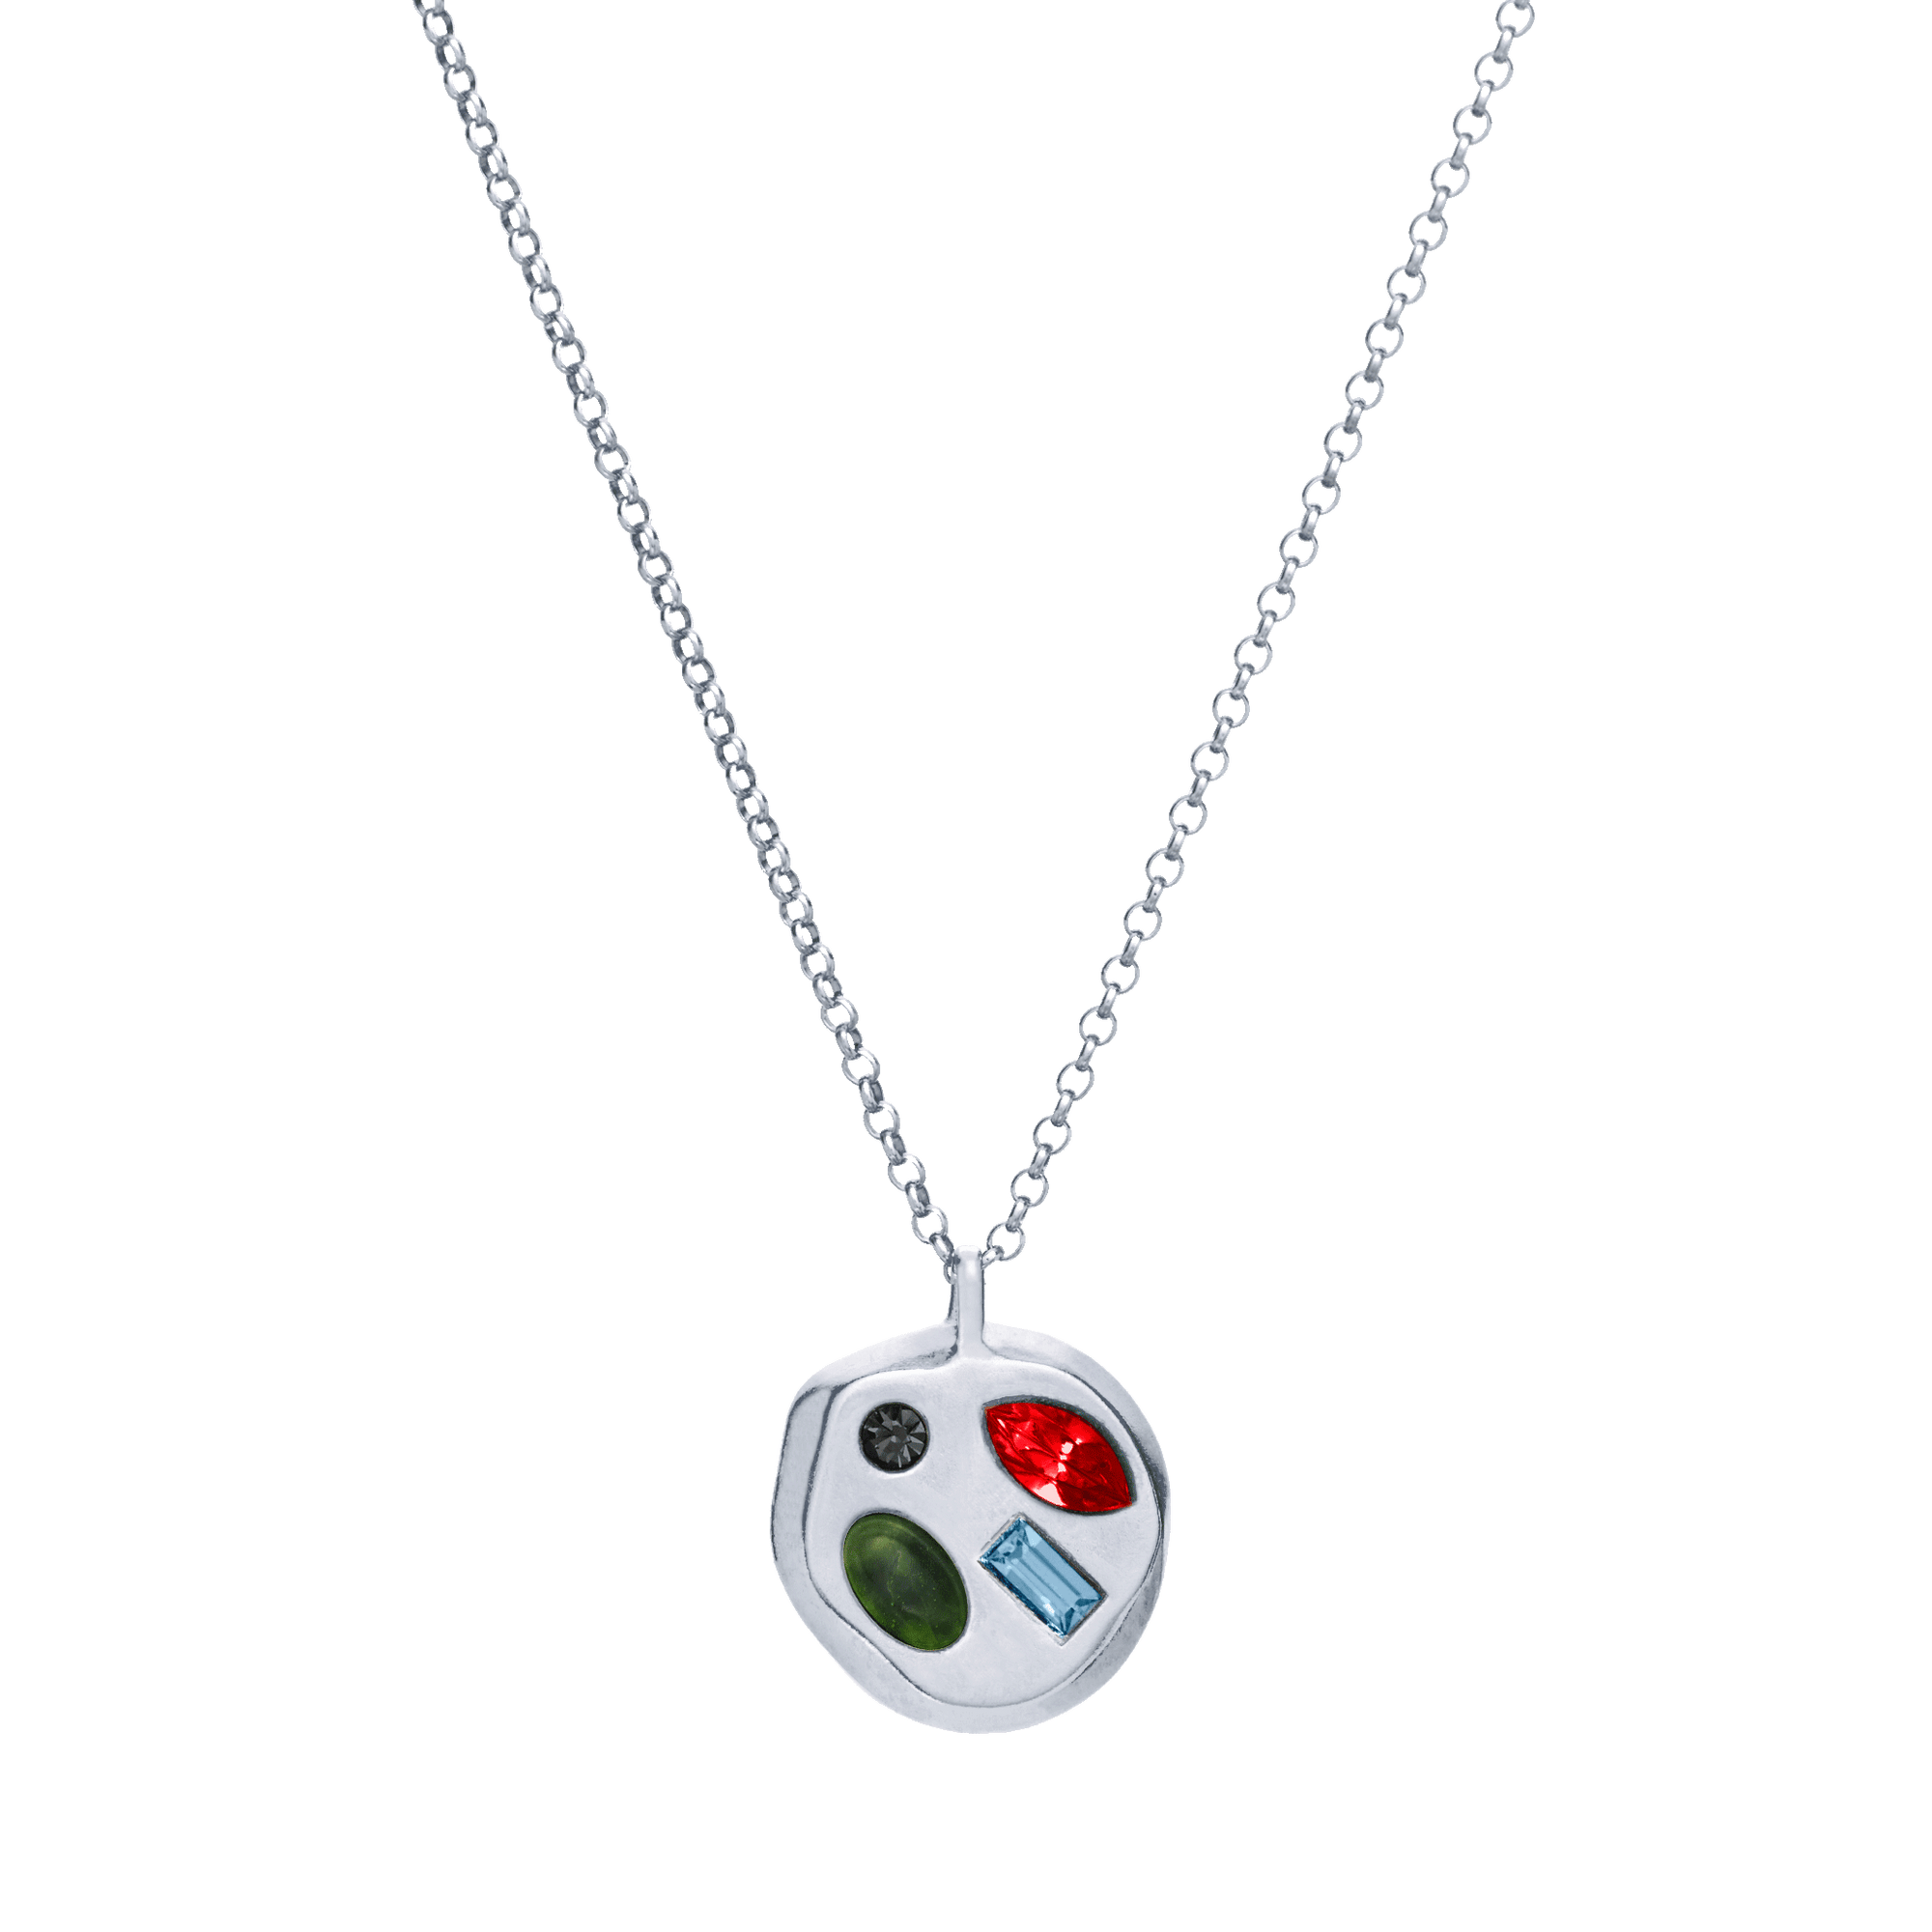 The January Thirteenth Pendant in Sterling Silver